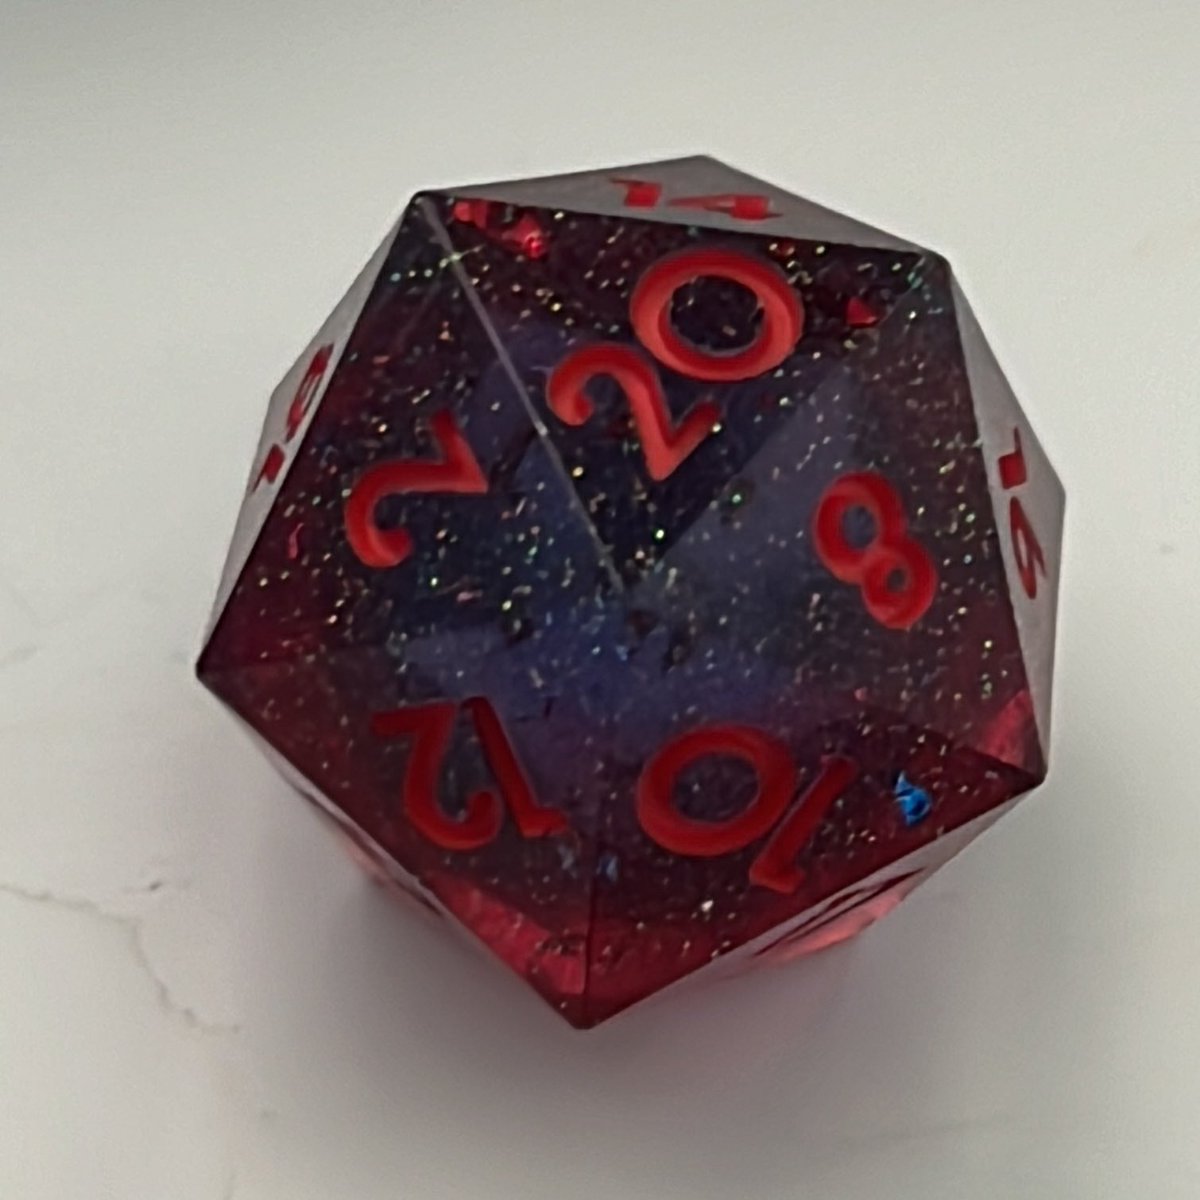 What I have learn by playing DnD. Conflict in live can be solved by simple way. Initiative roll or disengage. Yeah you can solve by other ways but life is too short for too much dice roll…